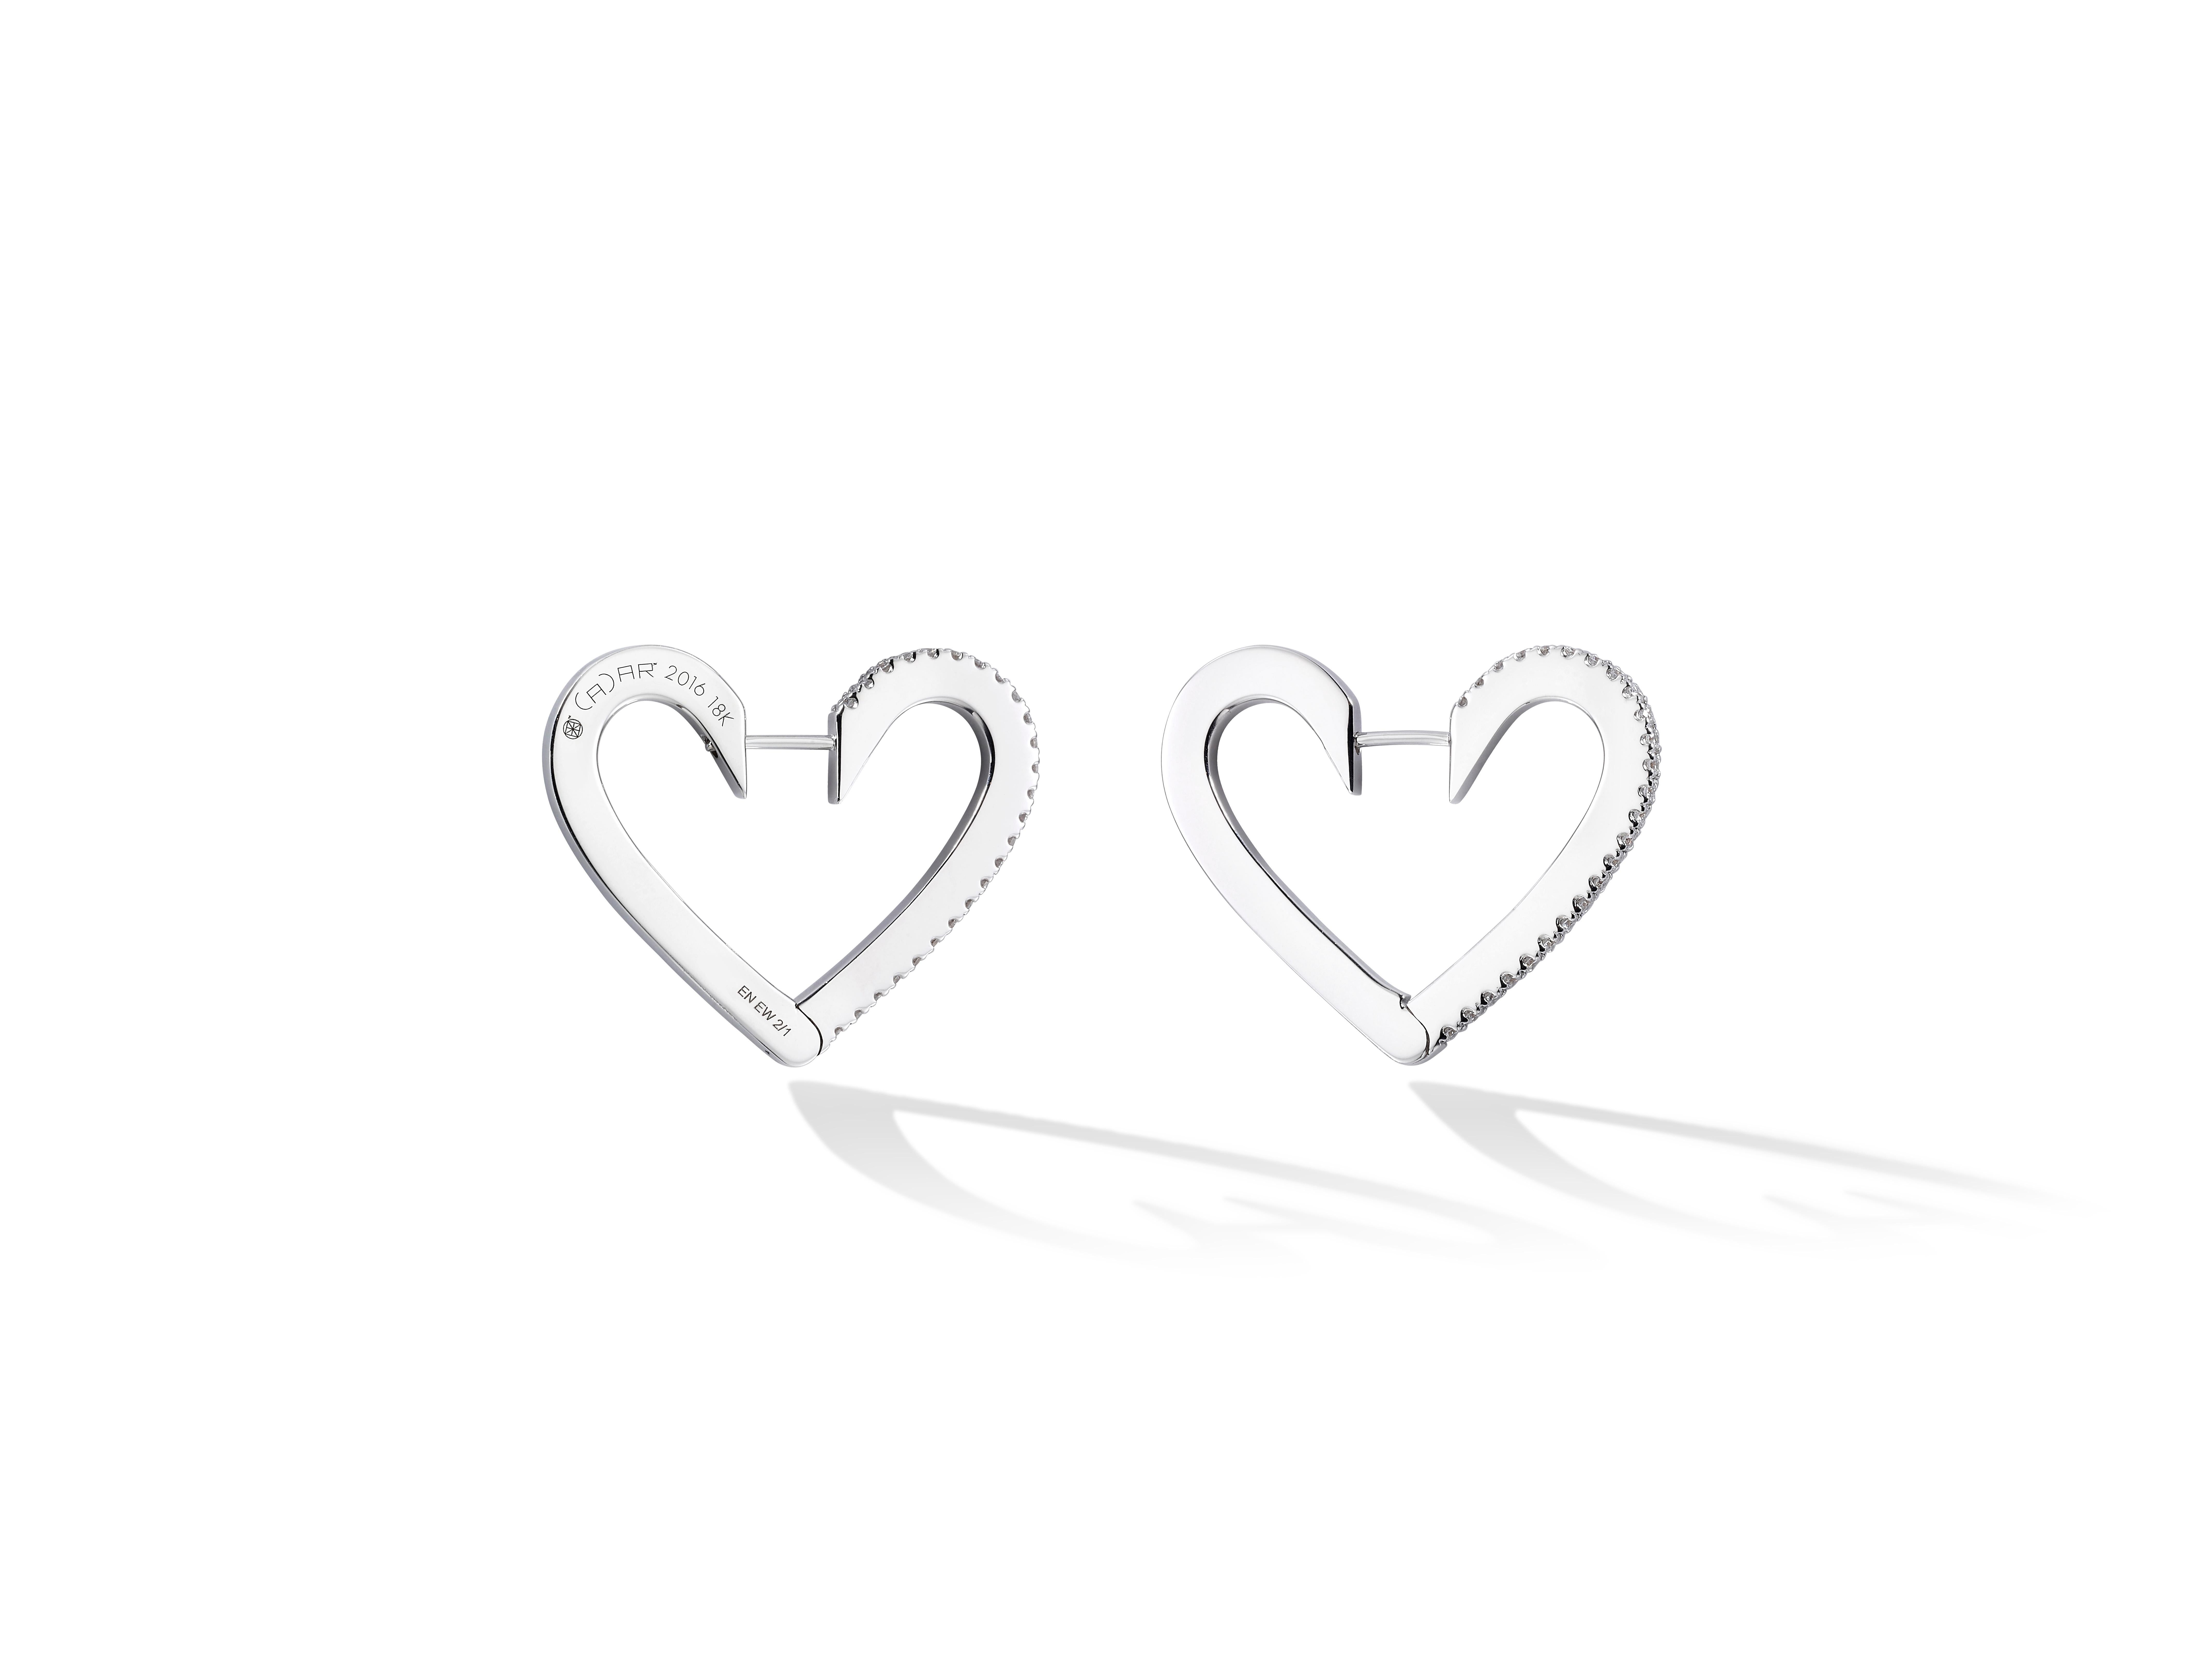 Euphoria of love. These heart-shaped hoops recall the vibrant sensation of fluttering butterflies brought on by new love. Handcrafted in high polished 18K yellow gold and .60cttw white GVVS-2 diamonds, and fastened by a discrete hidden post. Also